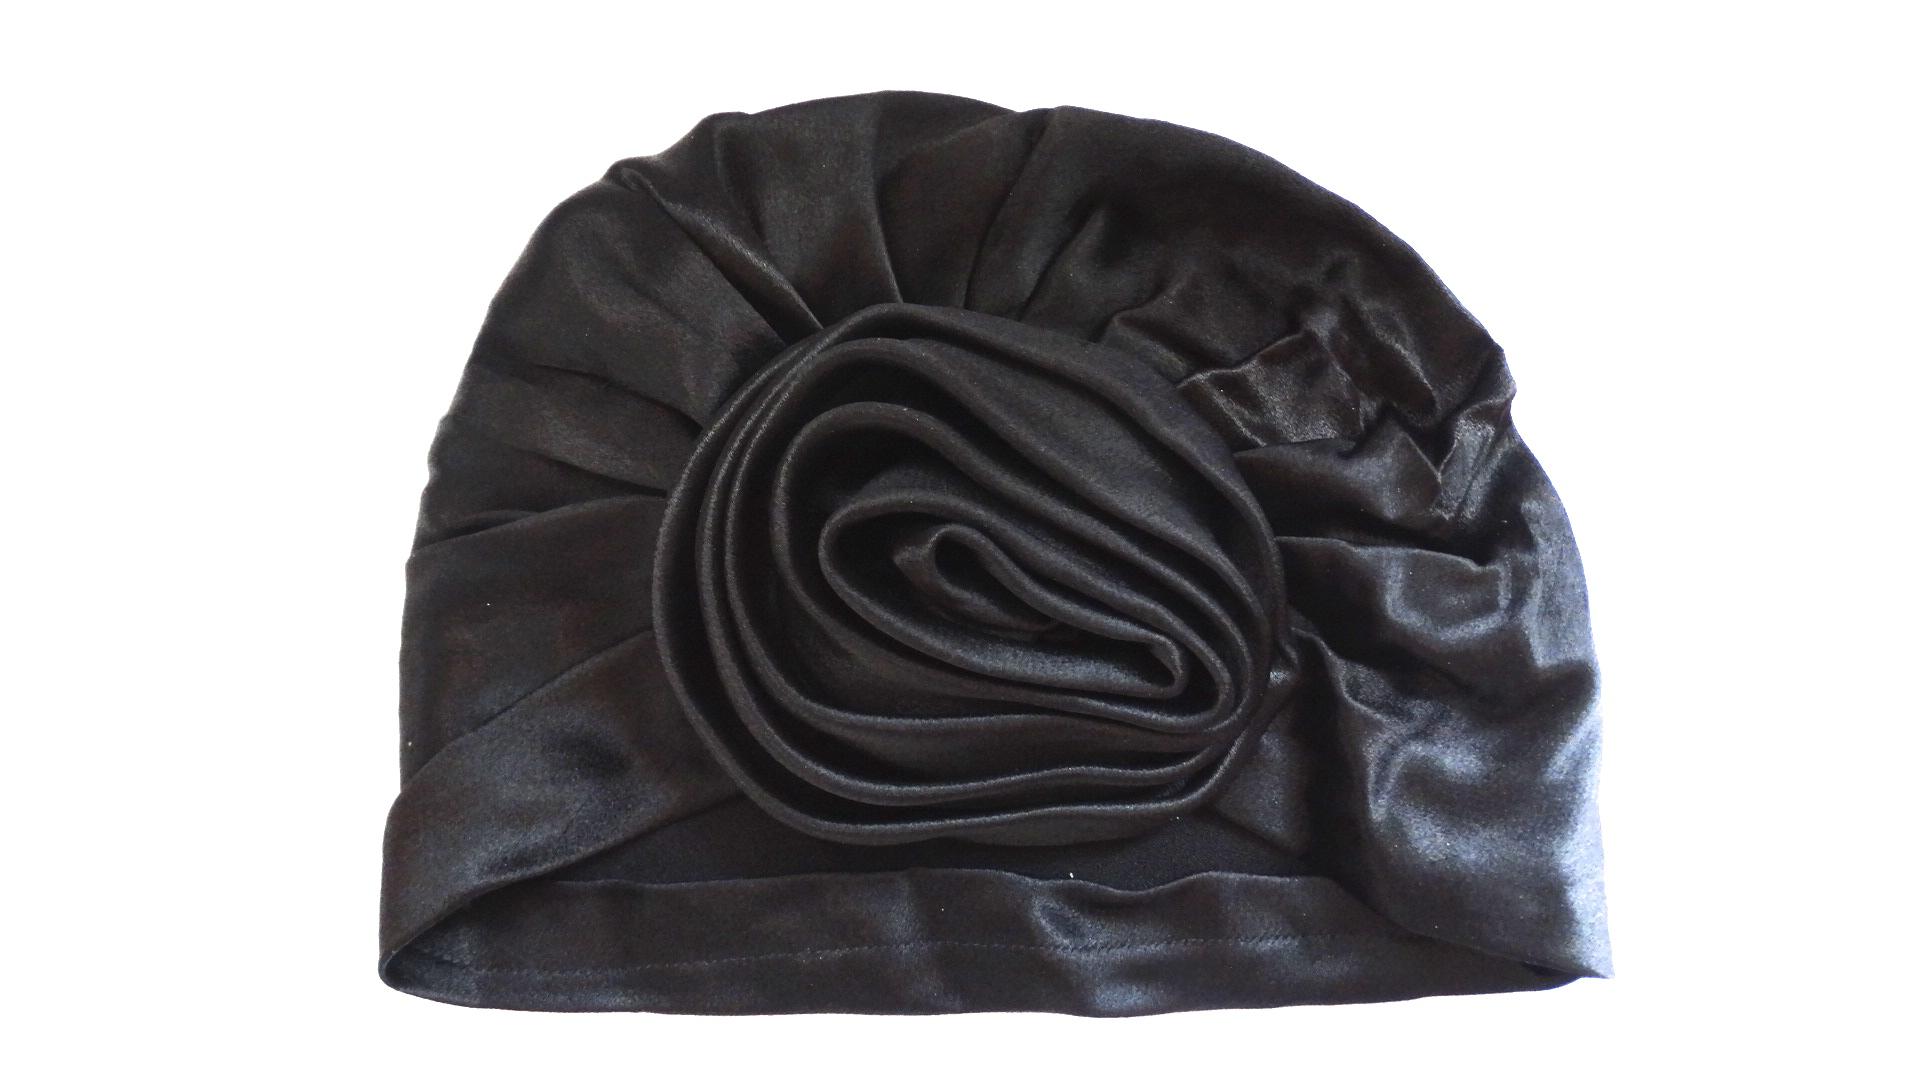 We love a good turban- and you will too with our adorable Frank Olive hat circa the 1960s! Black satin fabric, classic turban construction with gathered three dimensional rose effect at the front. Pulls onto the head effortlessly- no tying required!